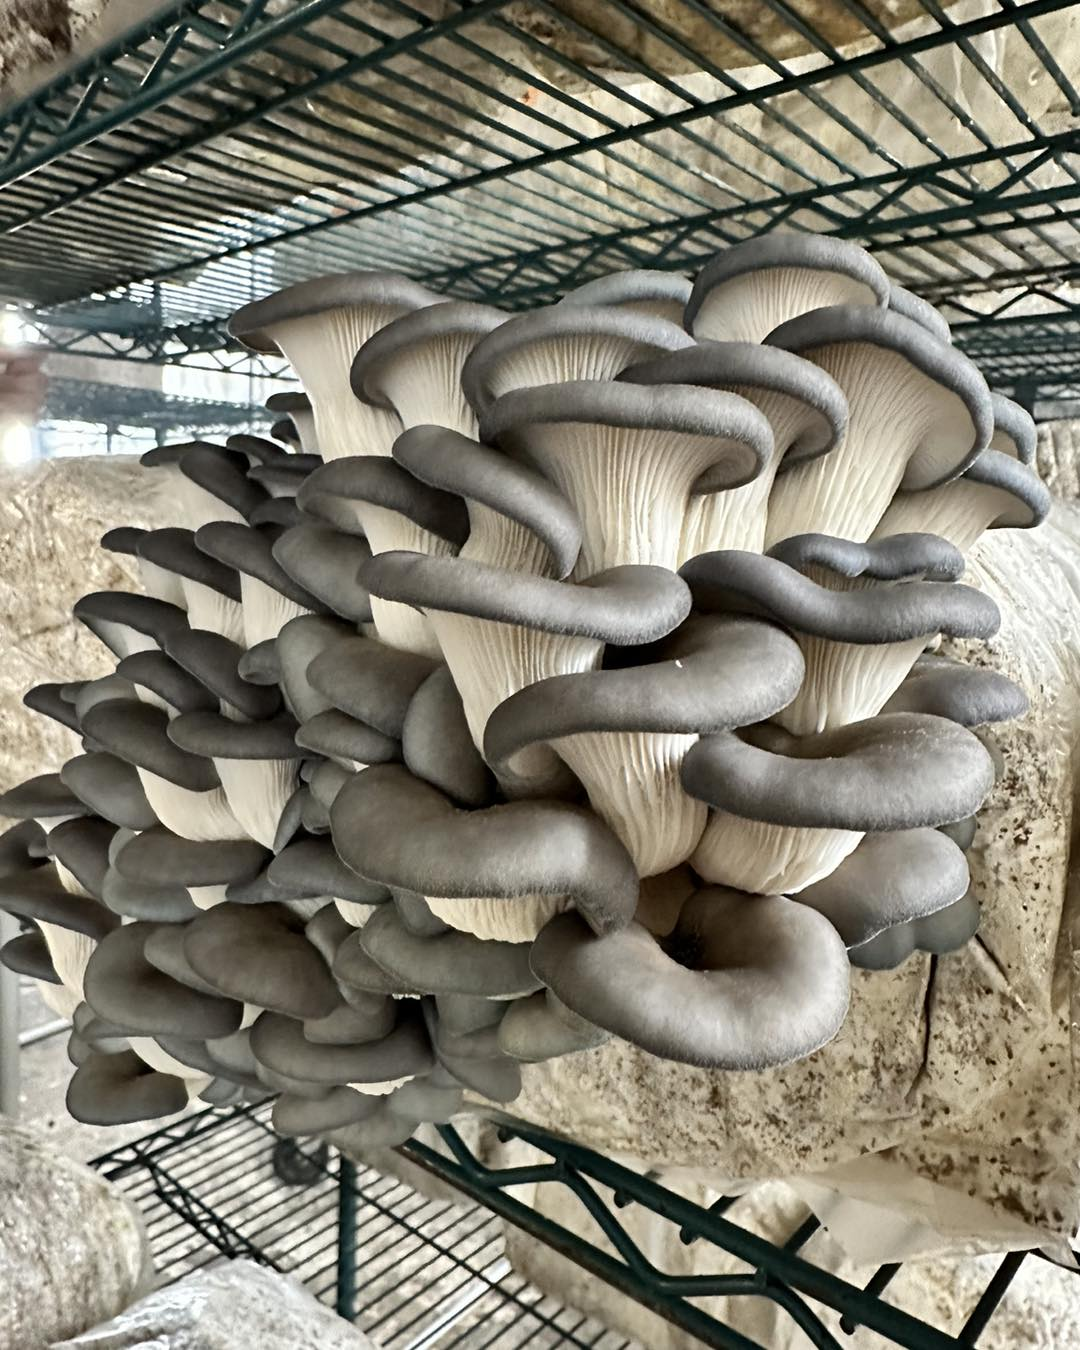 What Does It Take To Be A Mushroom Farmer?